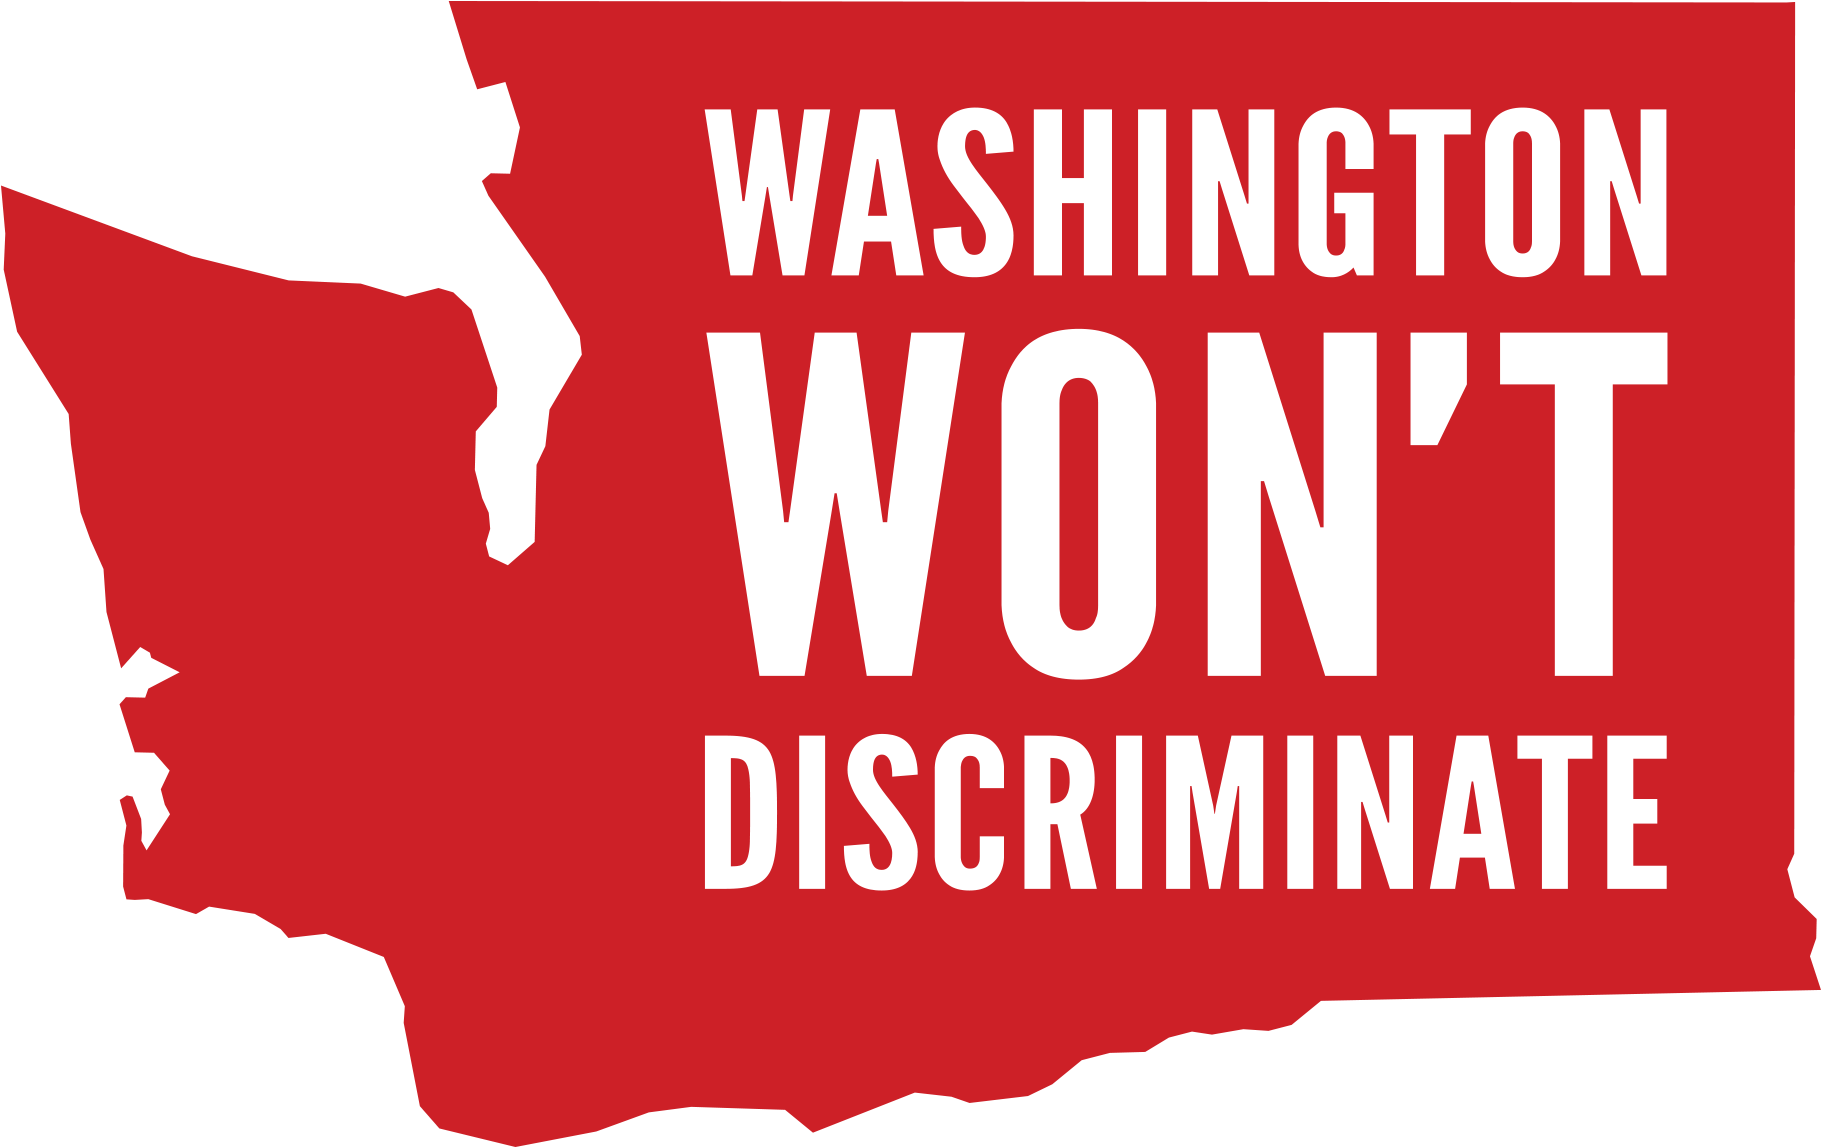 Washington Wont Discriminate Freedom For All Americans - Make A Difference (2000x2000)